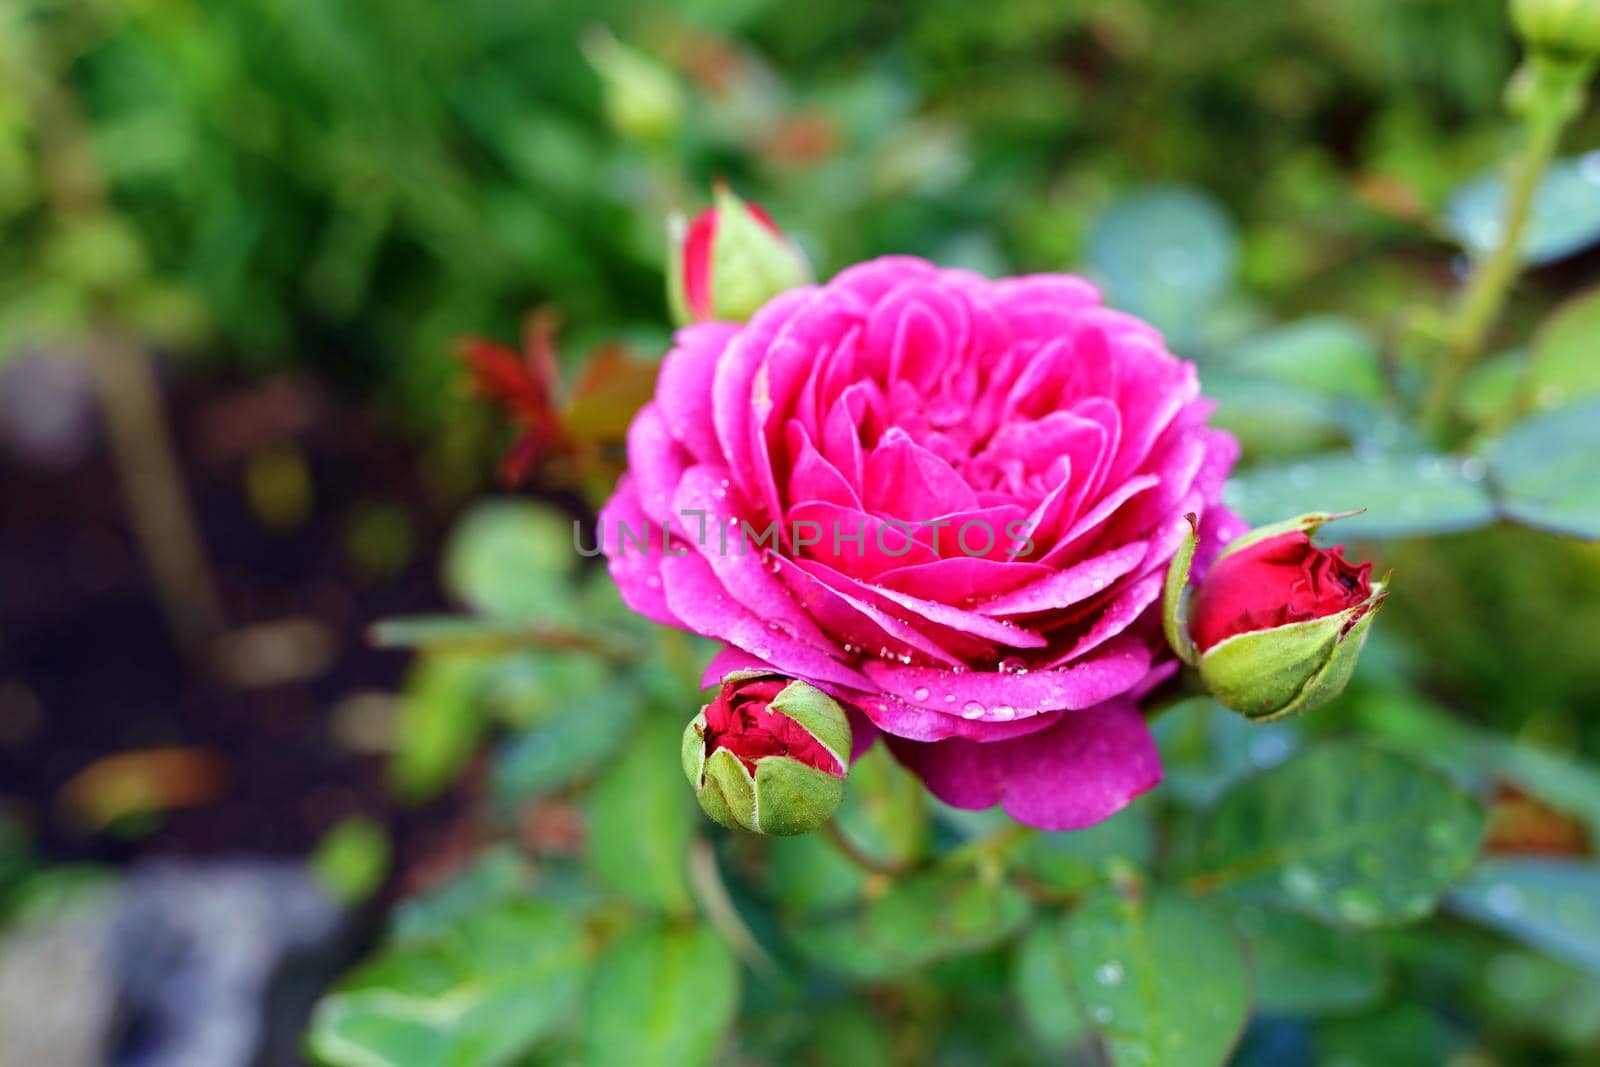 Pink garden rose with bud in natural green environment outdoors. Close-up view